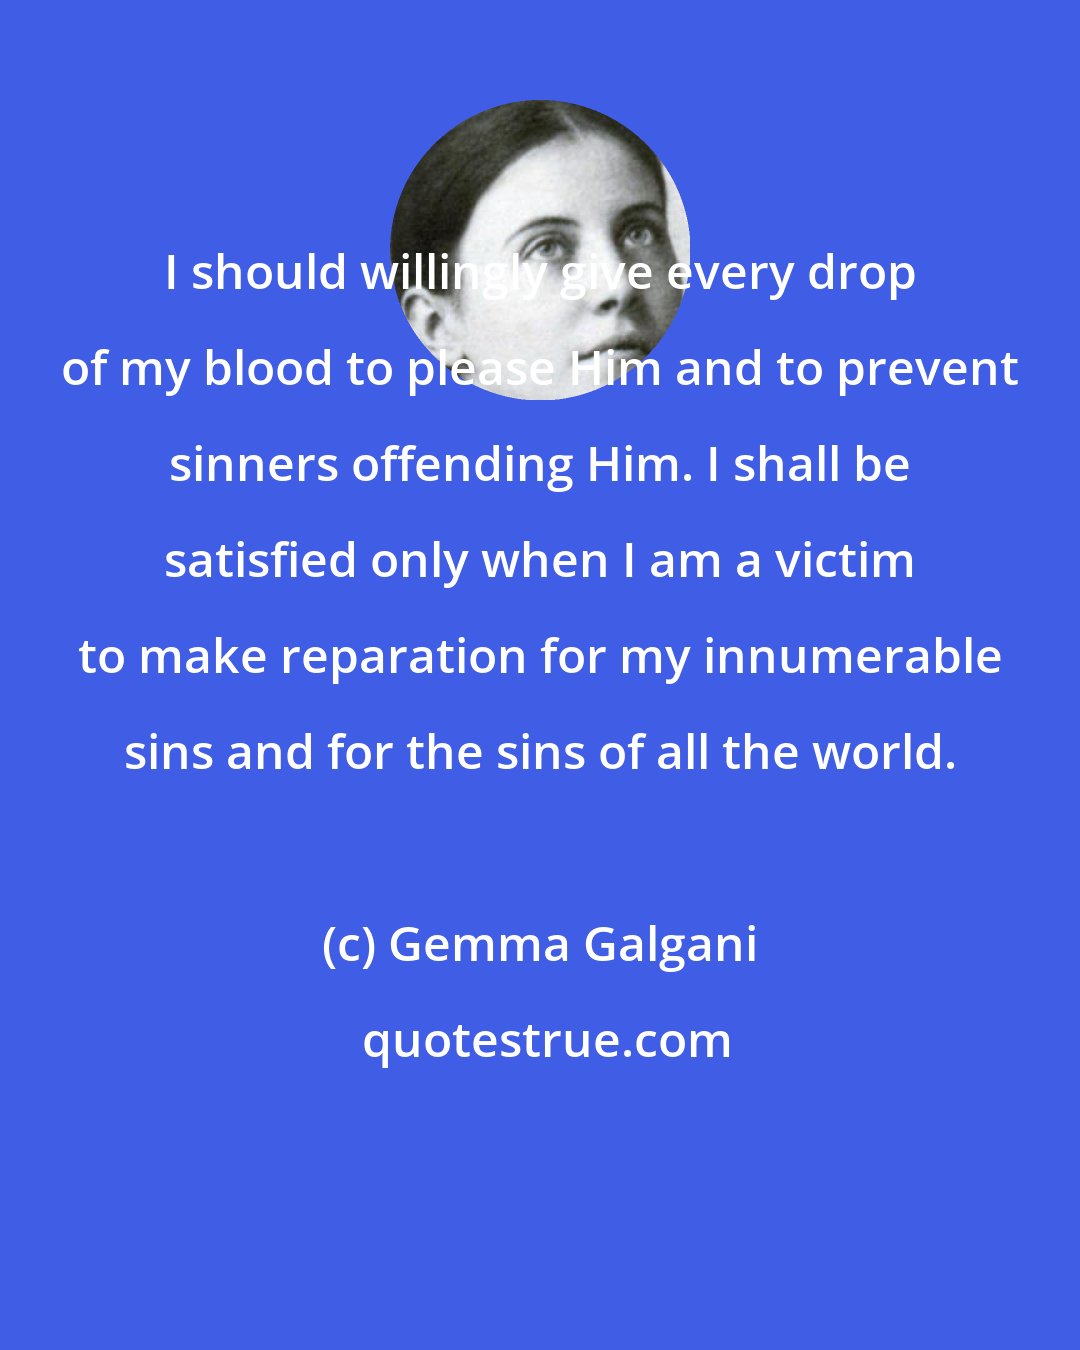 Gemma Galgani: I should willingly give every drop of my blood to please Him and to prevent sinners offending Him. I shall be satisfied only when I am a victim to make reparation for my innumerable sins and for the sins of all the world.